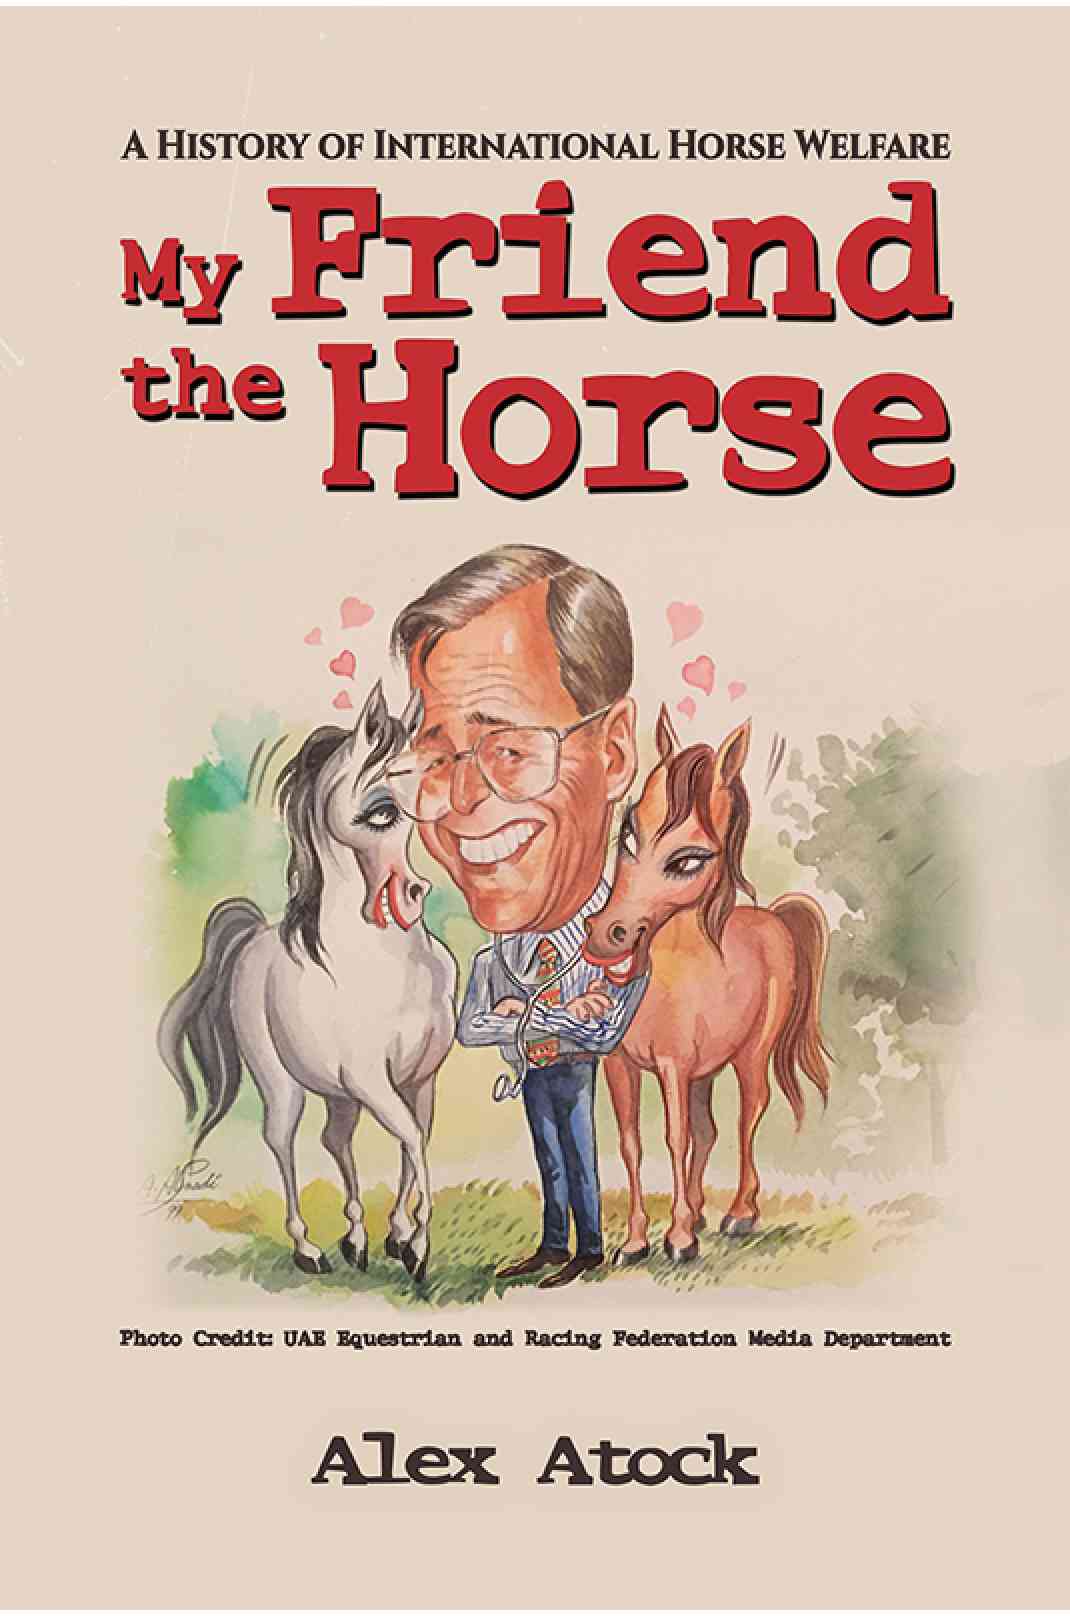 Alex Atock’s book ‘My Friend the Horse’ Reviewed by Equestrian Journalist